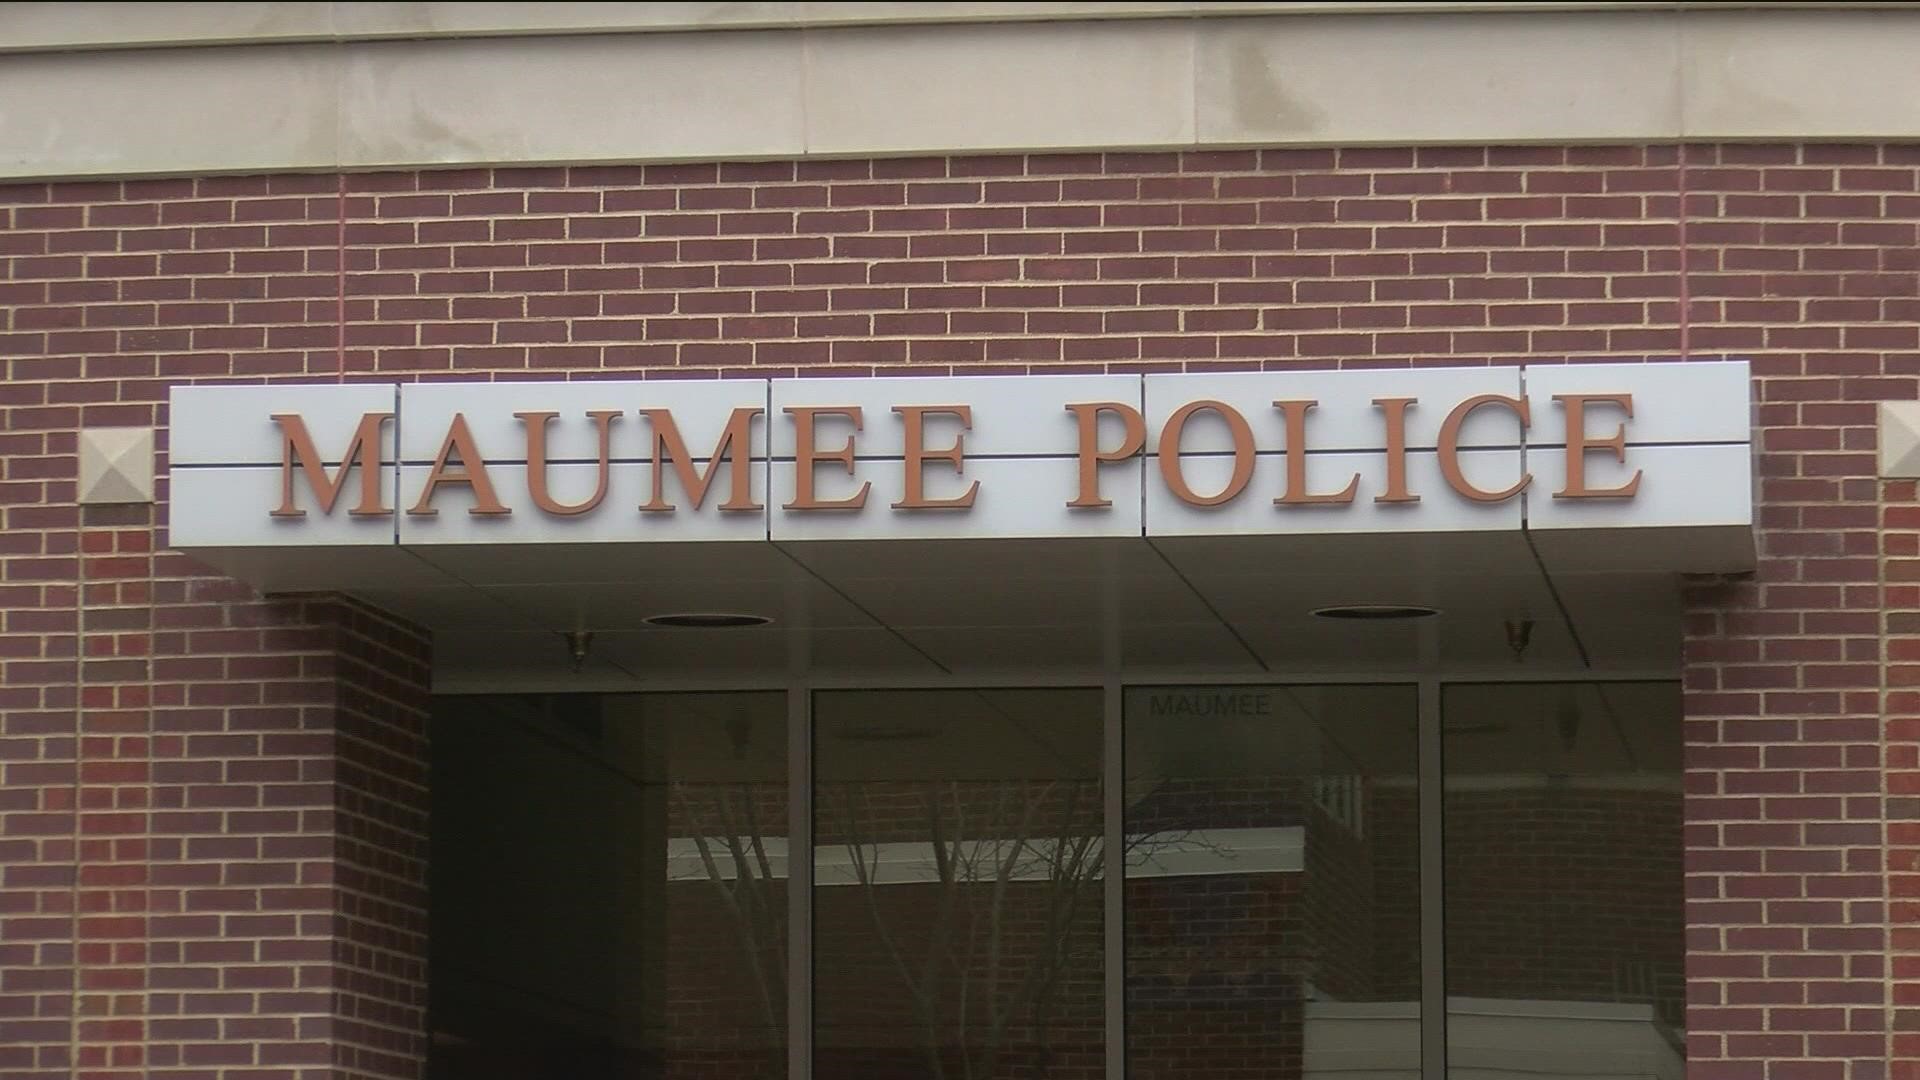 Maumee police reported Wednesday that Sgt. Greg Westrick, 50, had filed paperwork to retire. Westrick has been on paid leave since September.